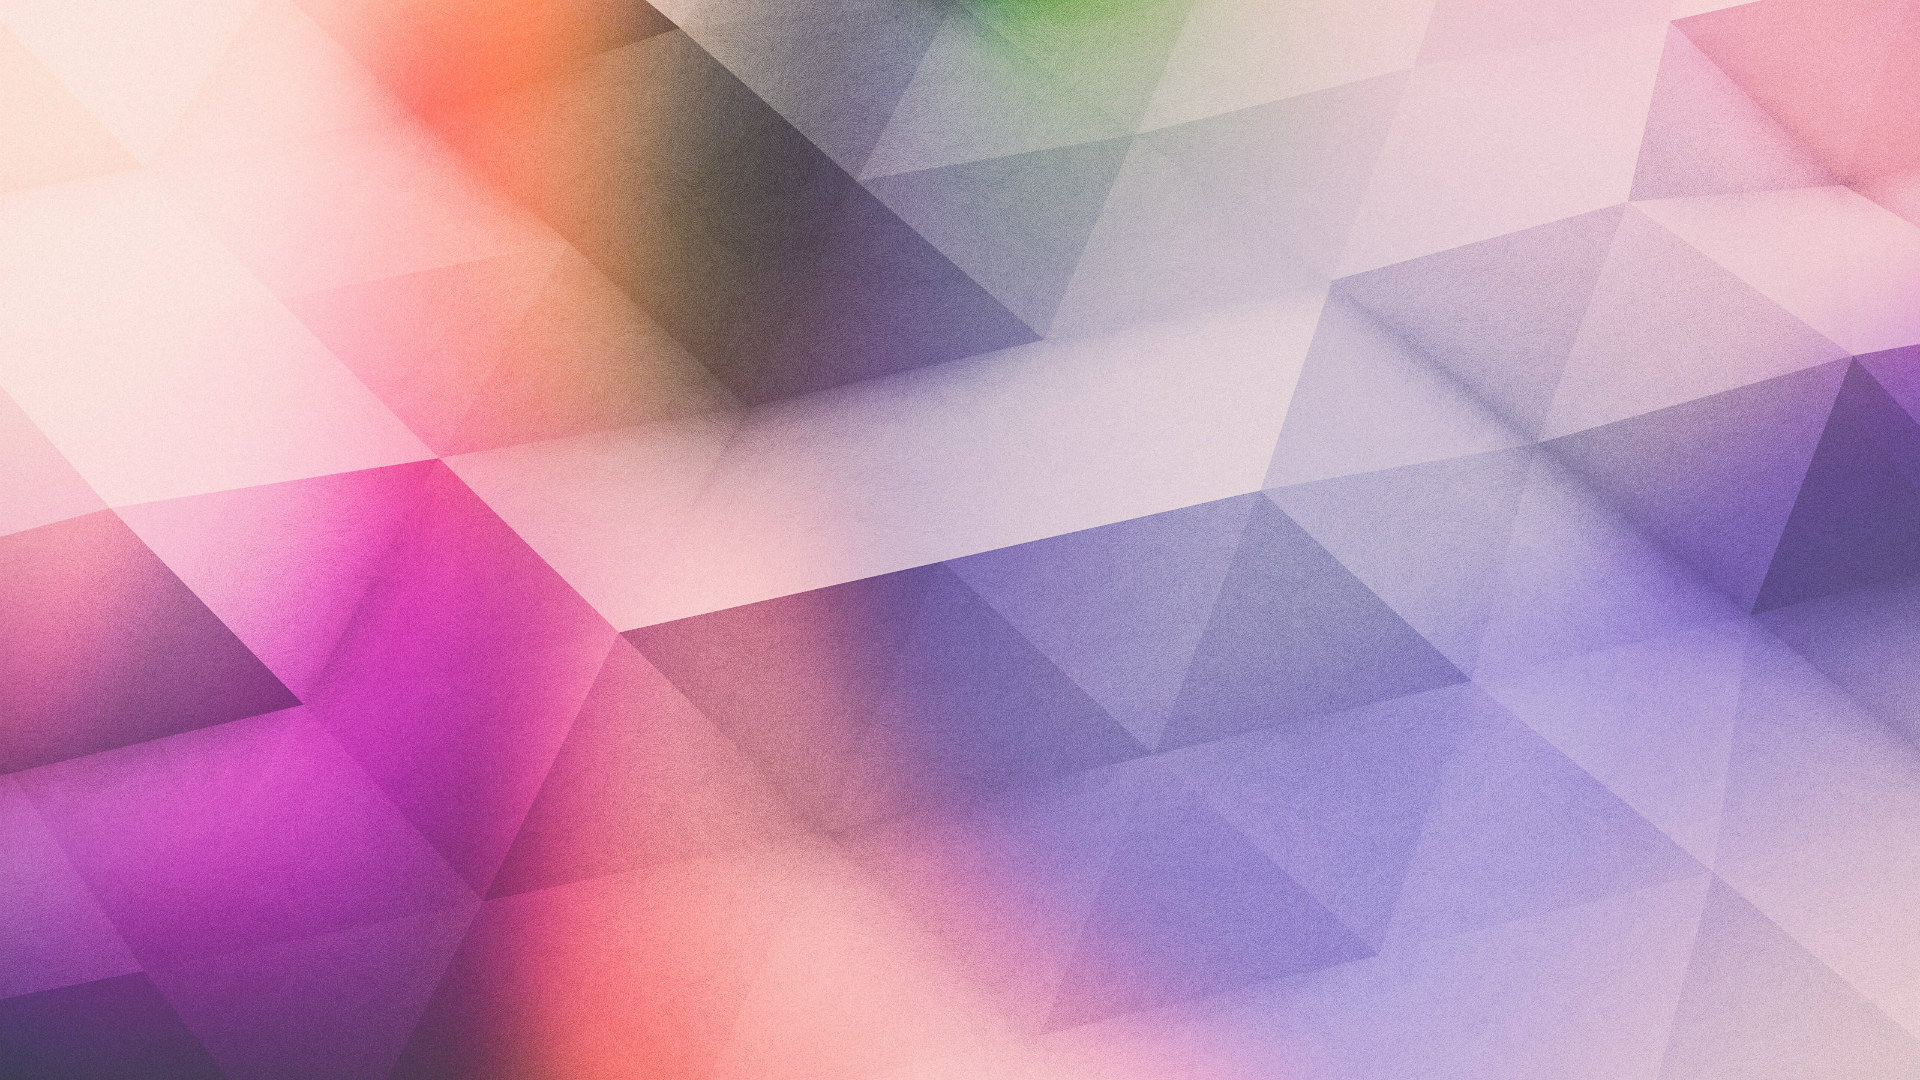 Abstract Triangles wallpaper   1112391 1920x1080